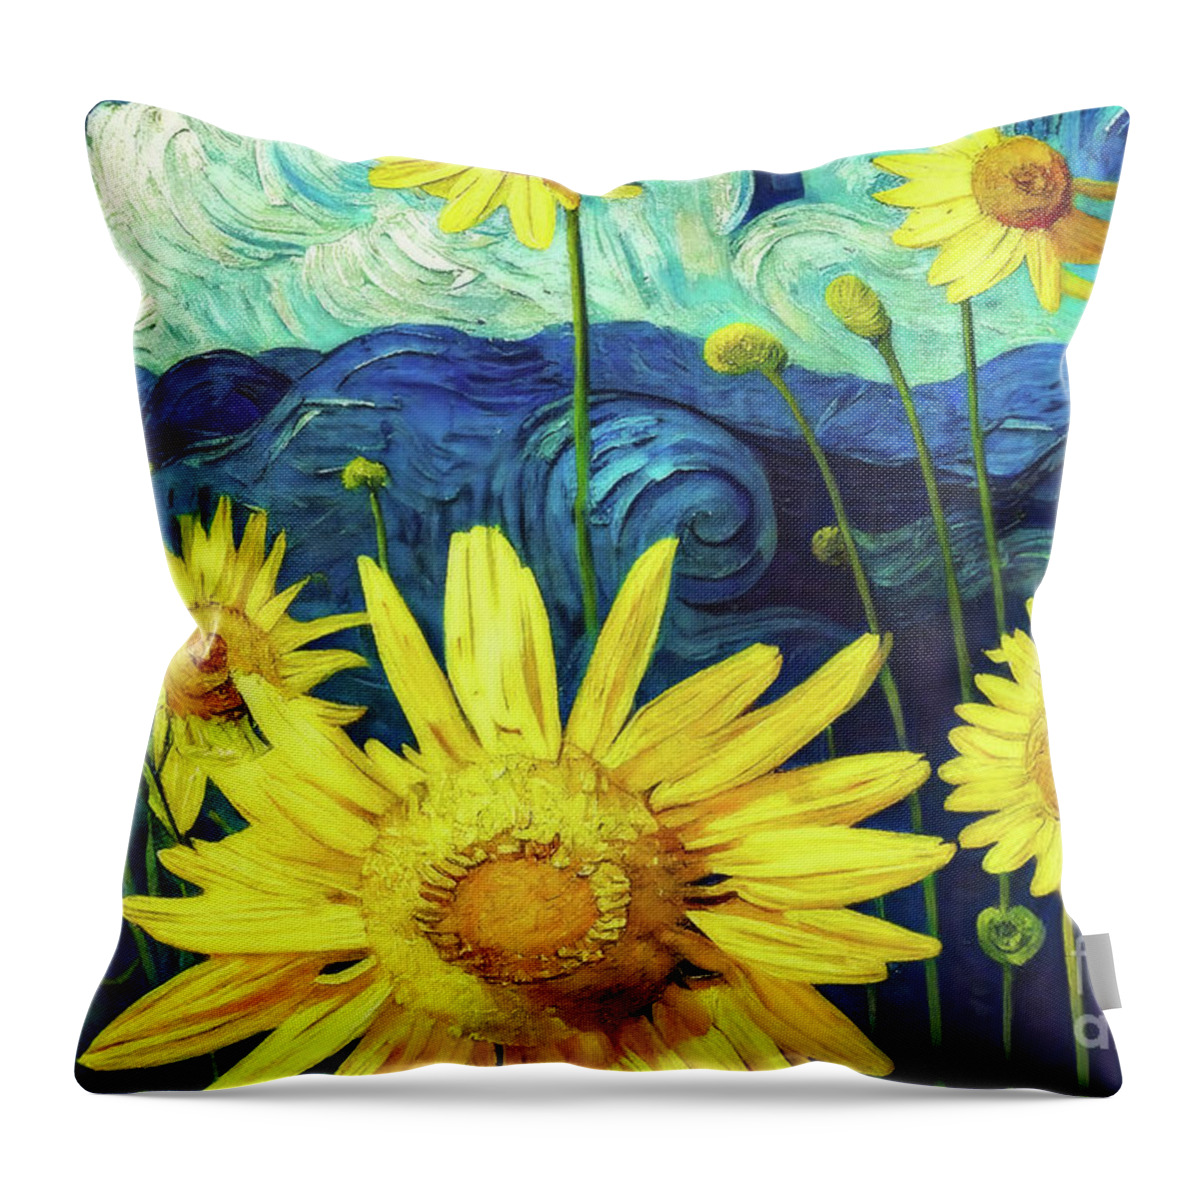 Sunflowers Throw Pillow featuring the painting Dreaming Of Sunflowers by Tina LeCour